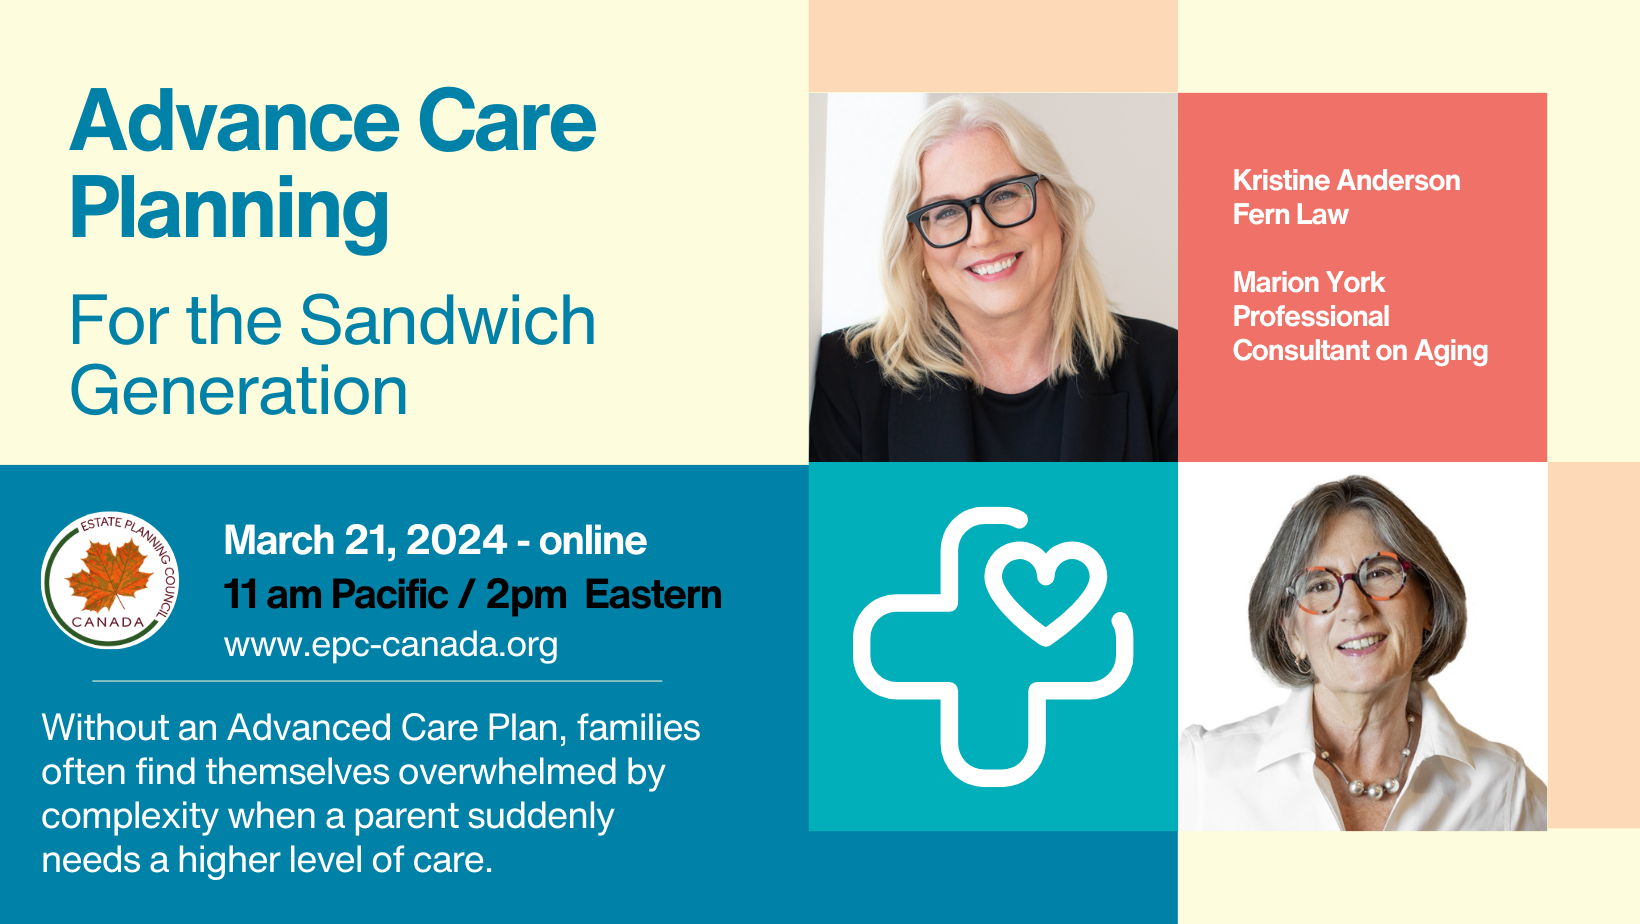 Advance Care Planning for the Sandwich Generation